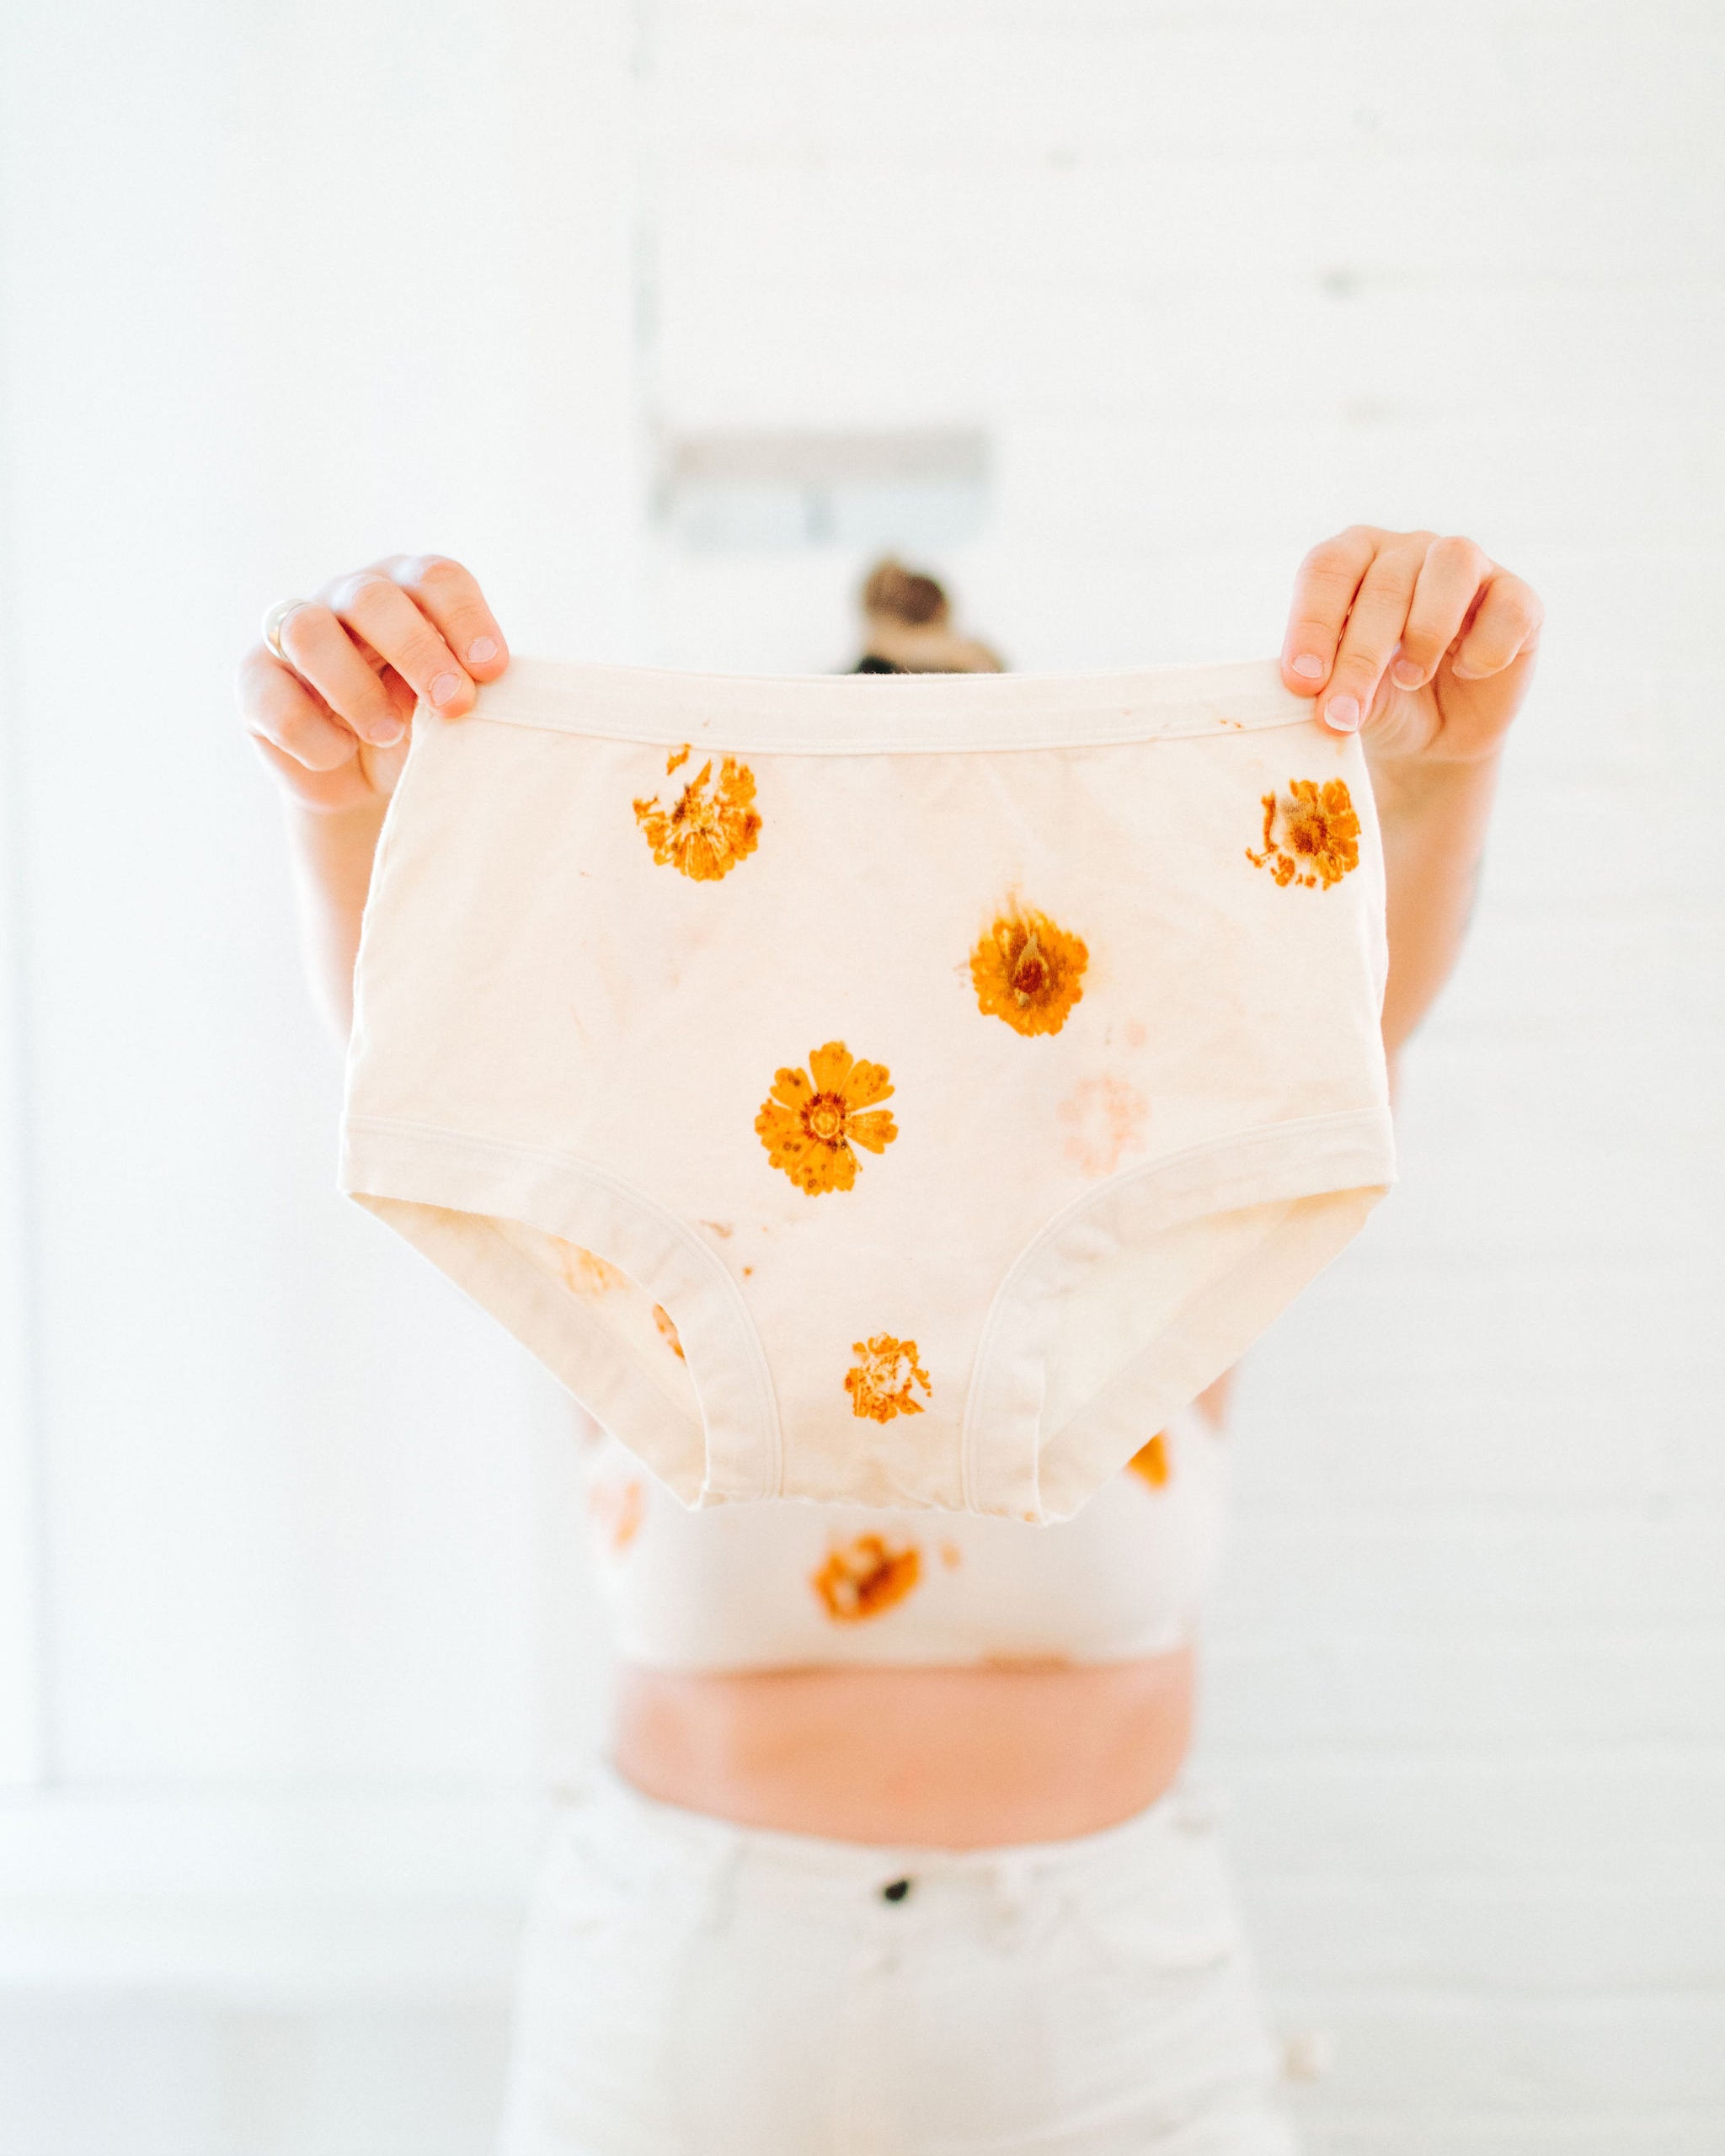 Person holding Thunderpants Original style underwear in the Limited Edition Flower Press Botanical Dye - flowers pressed on the underwear fabric to create a print.